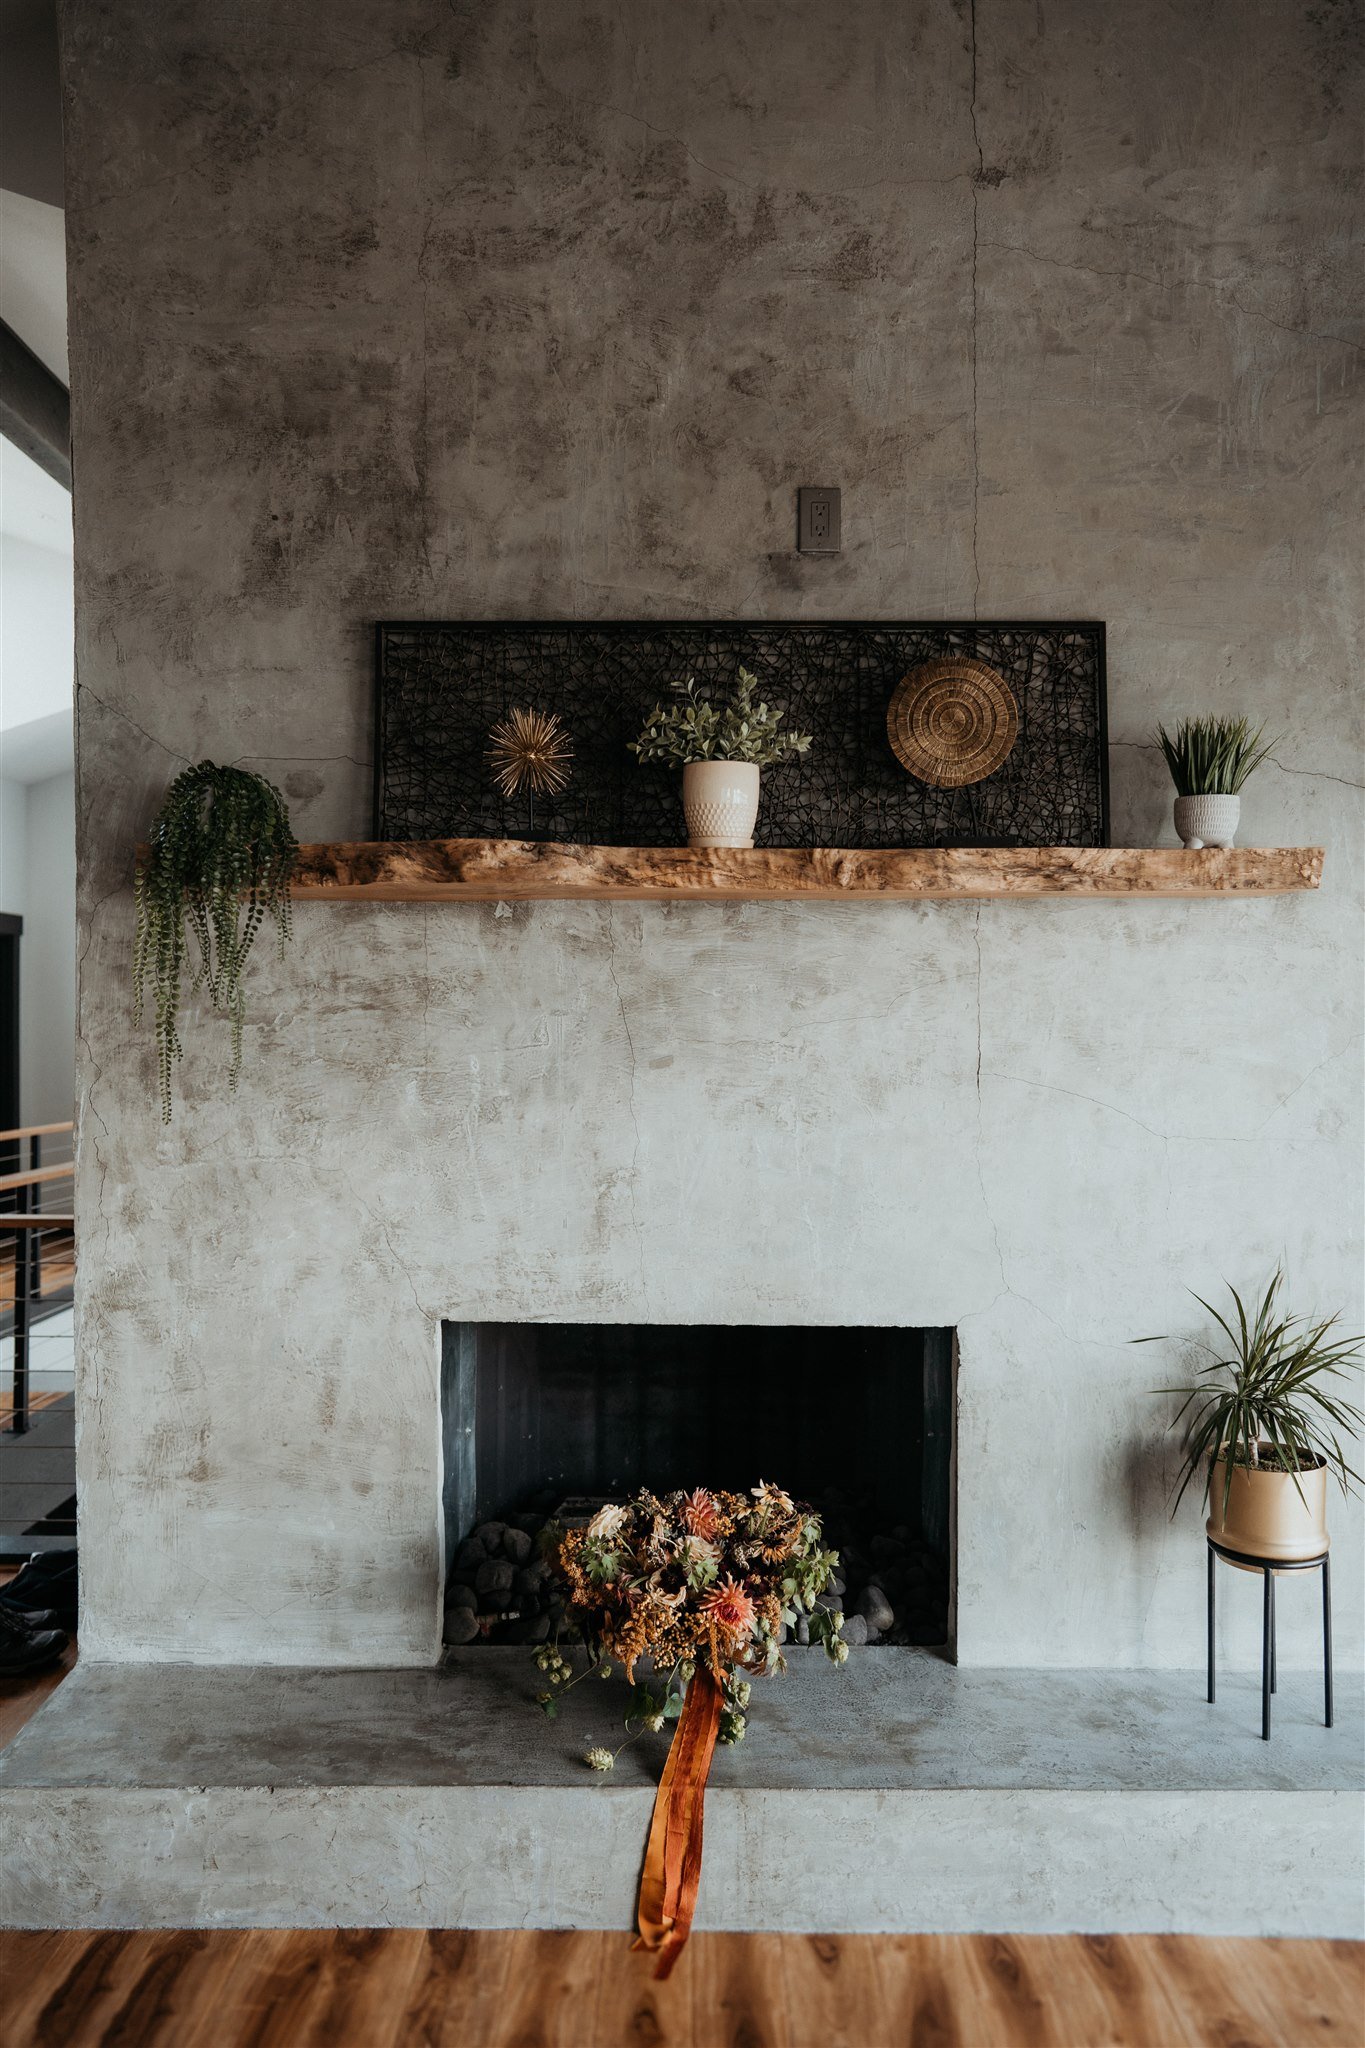 Autumn wedding bouquet sitting in front of concrete fireplace